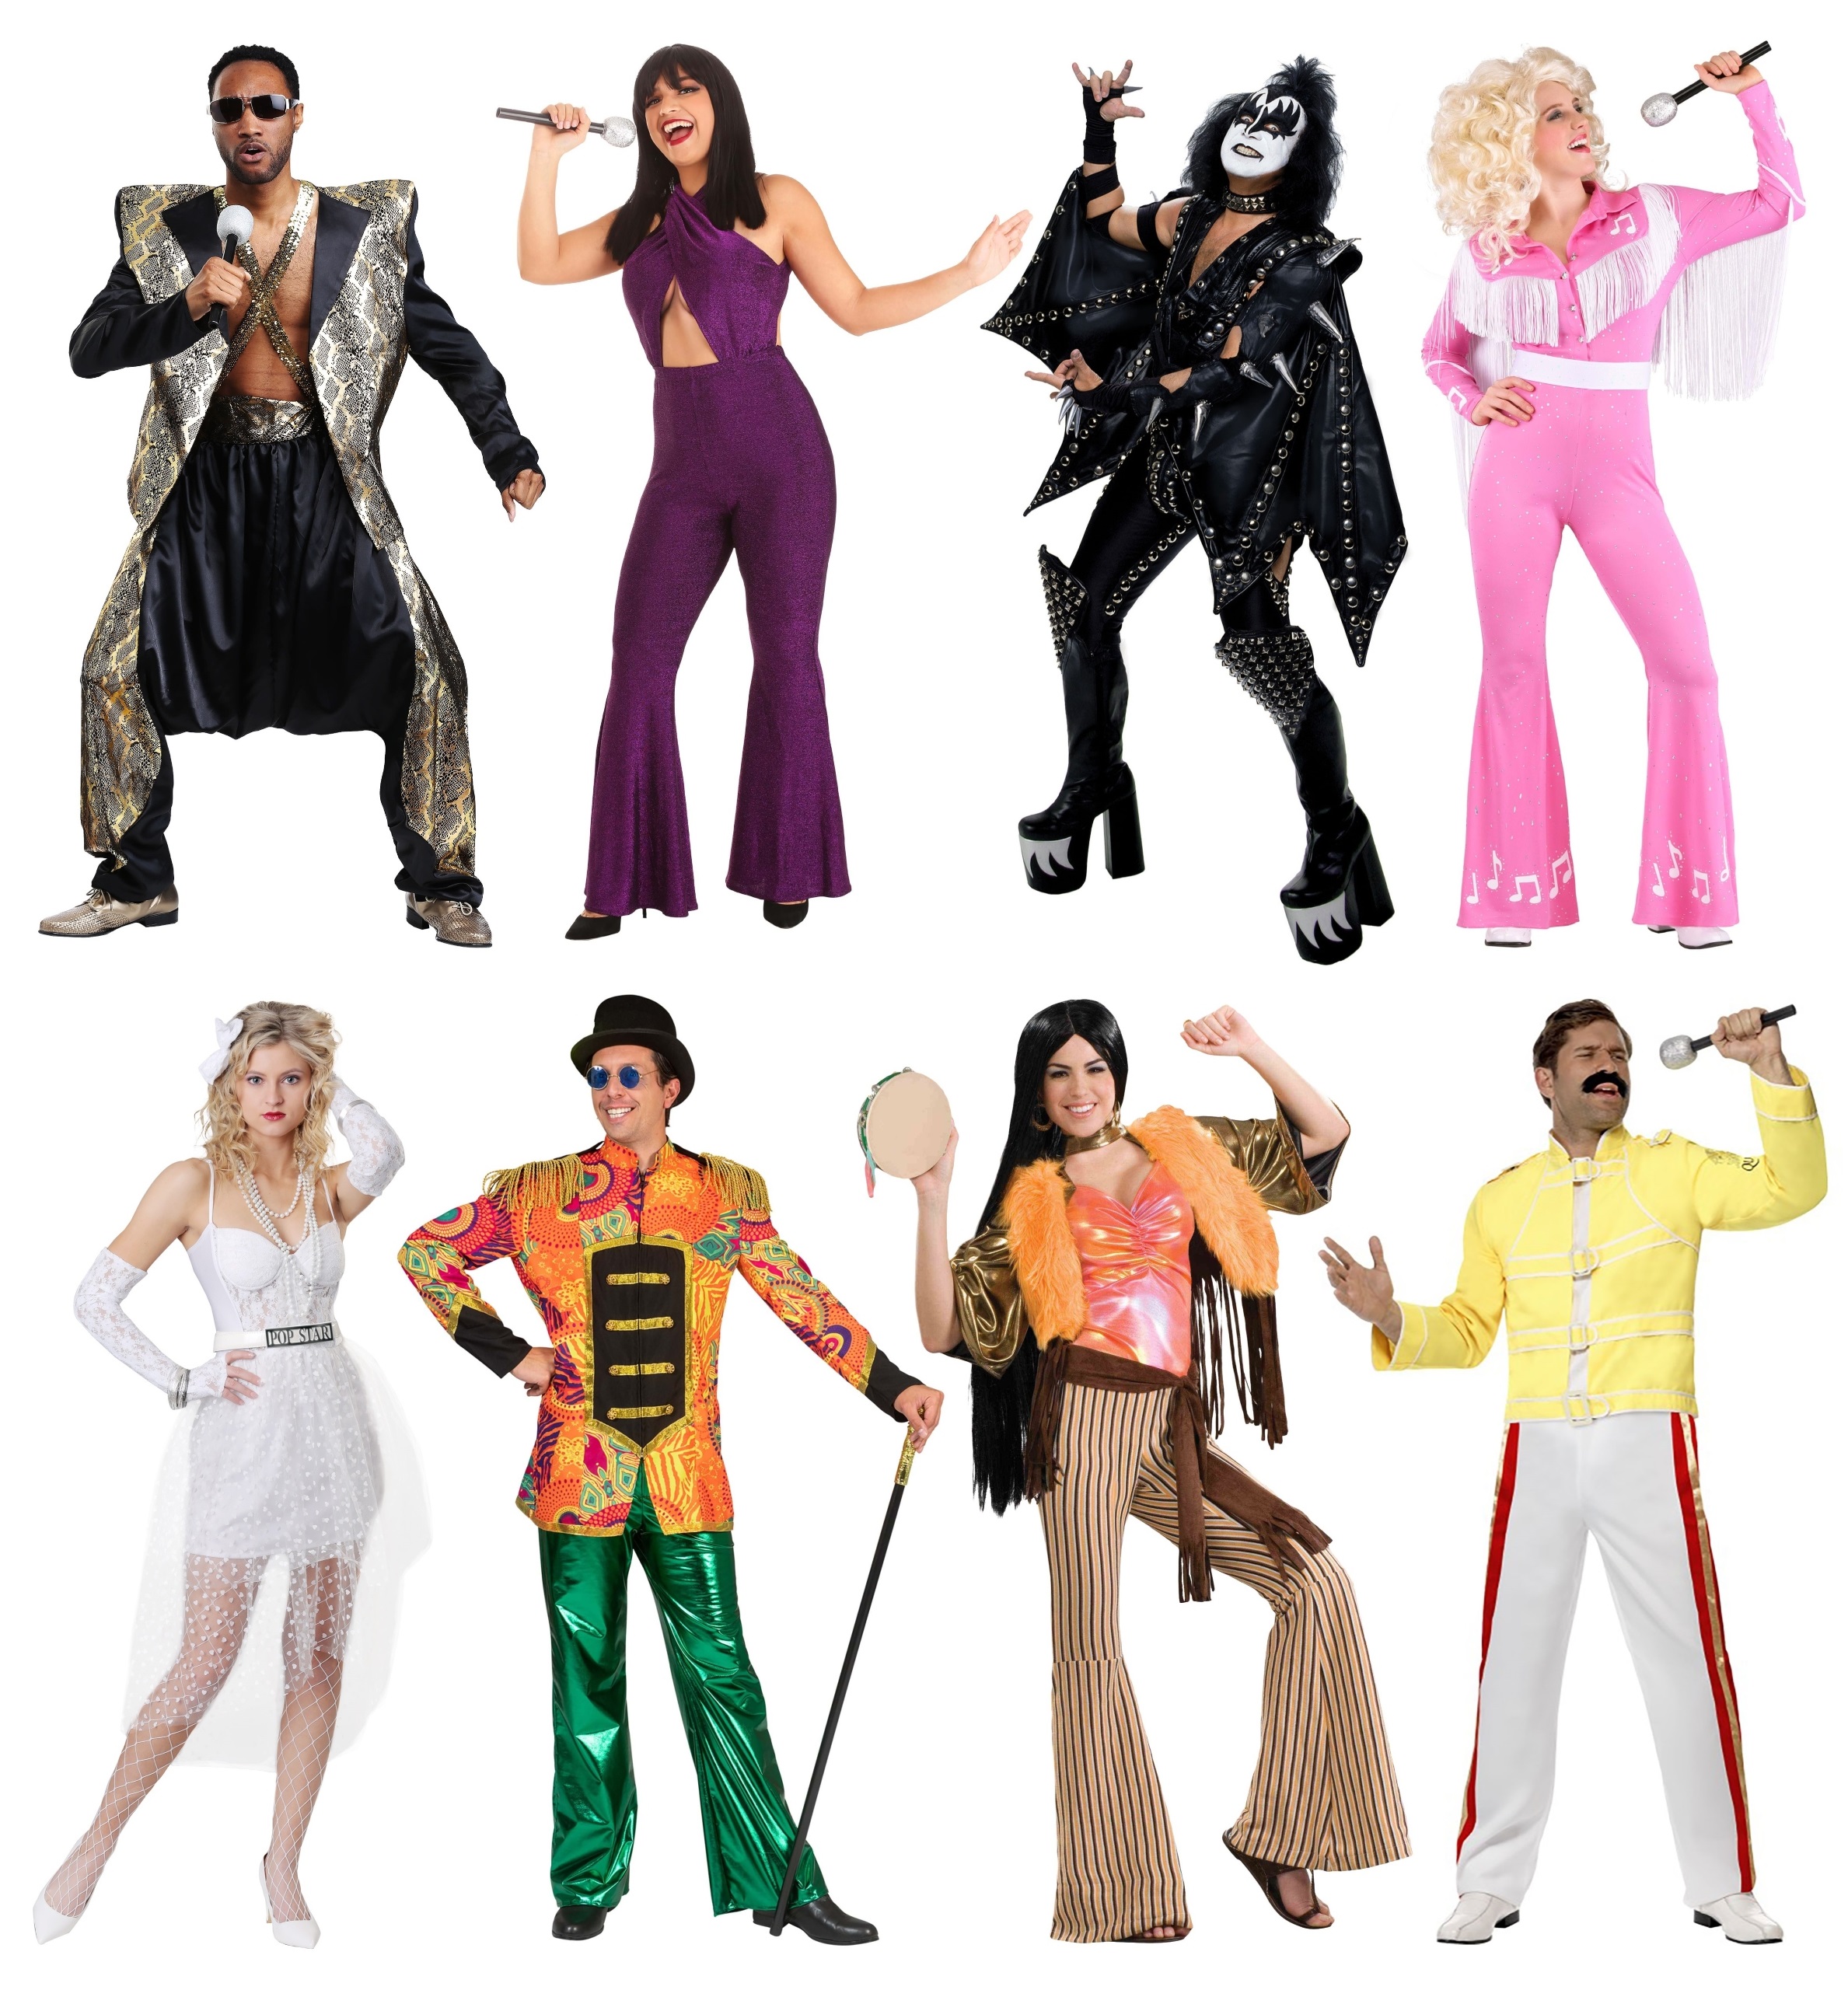 These Nostalgic Halloween Costumes Are a Blast From the Past [Costume ...